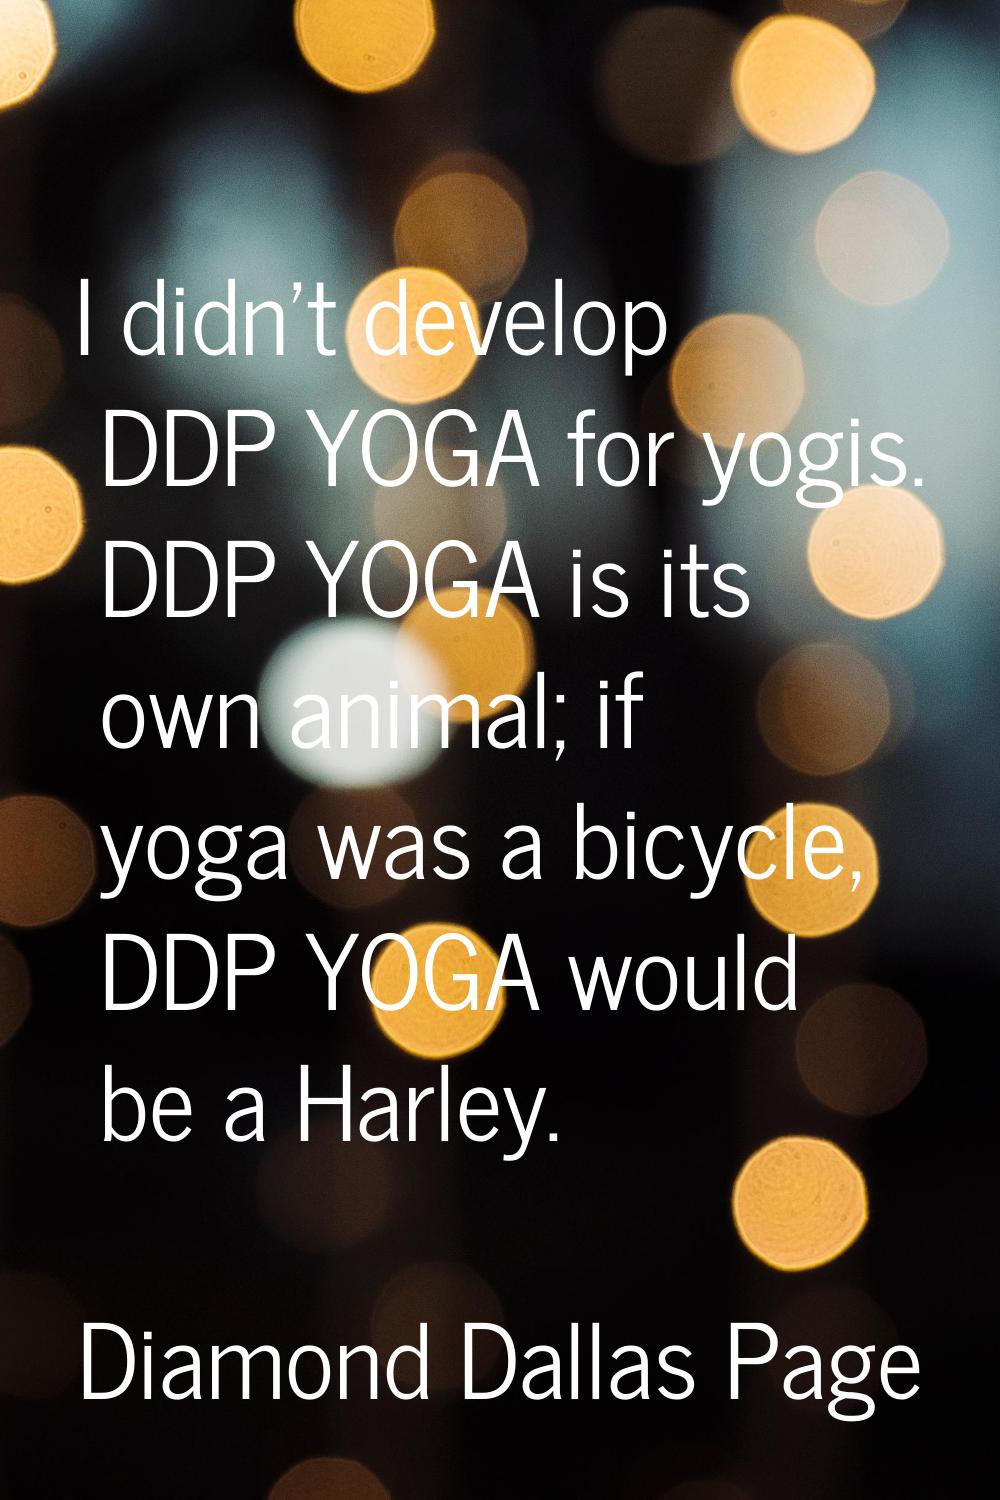 I didn't develop DDP YOGA for yogis. DDP YOGA is its own animal; if yoga was a bicycle, DDP YOGA wo